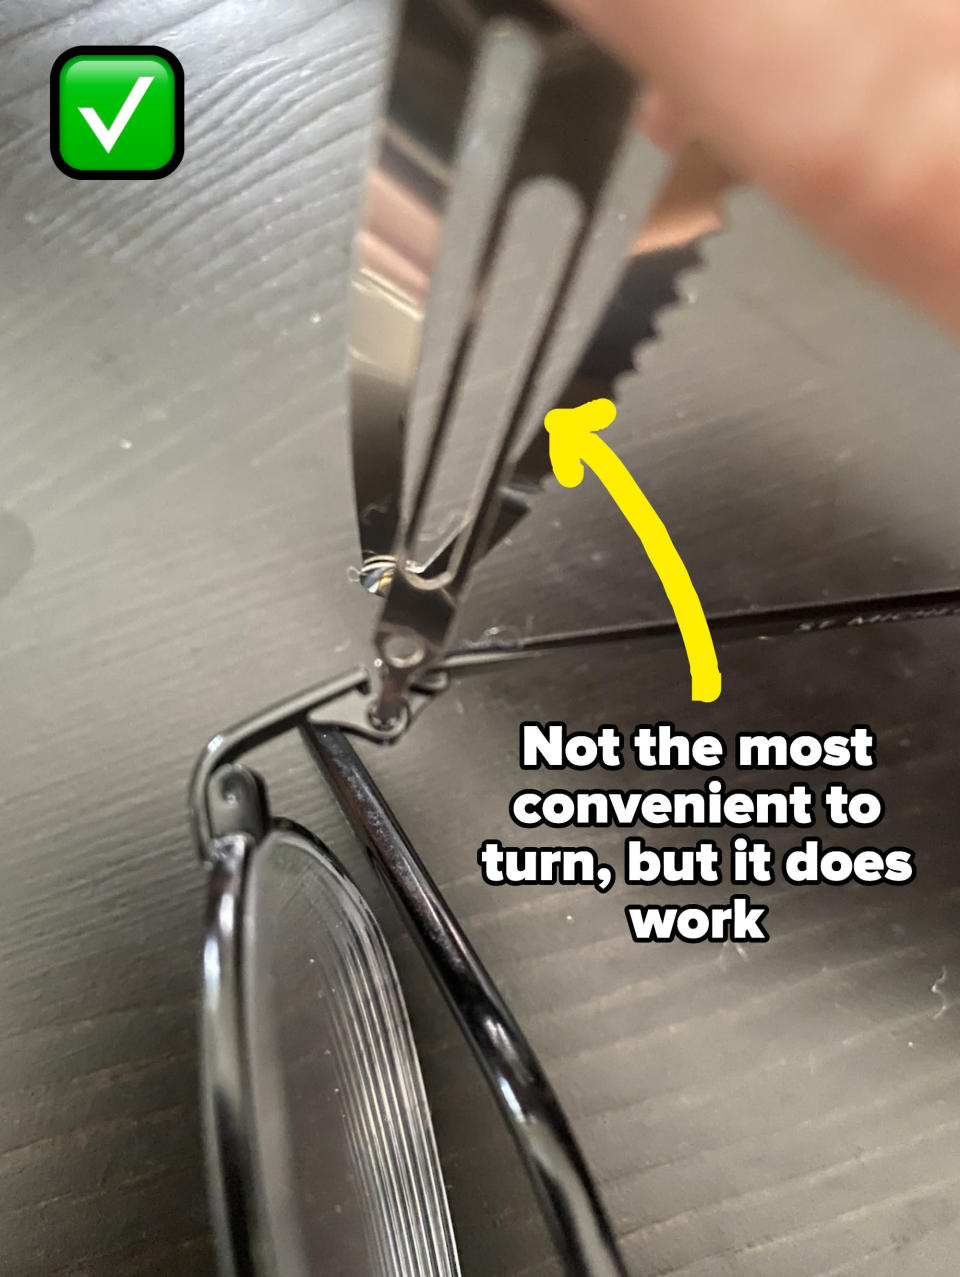 the clip being used to unscrew some glasses